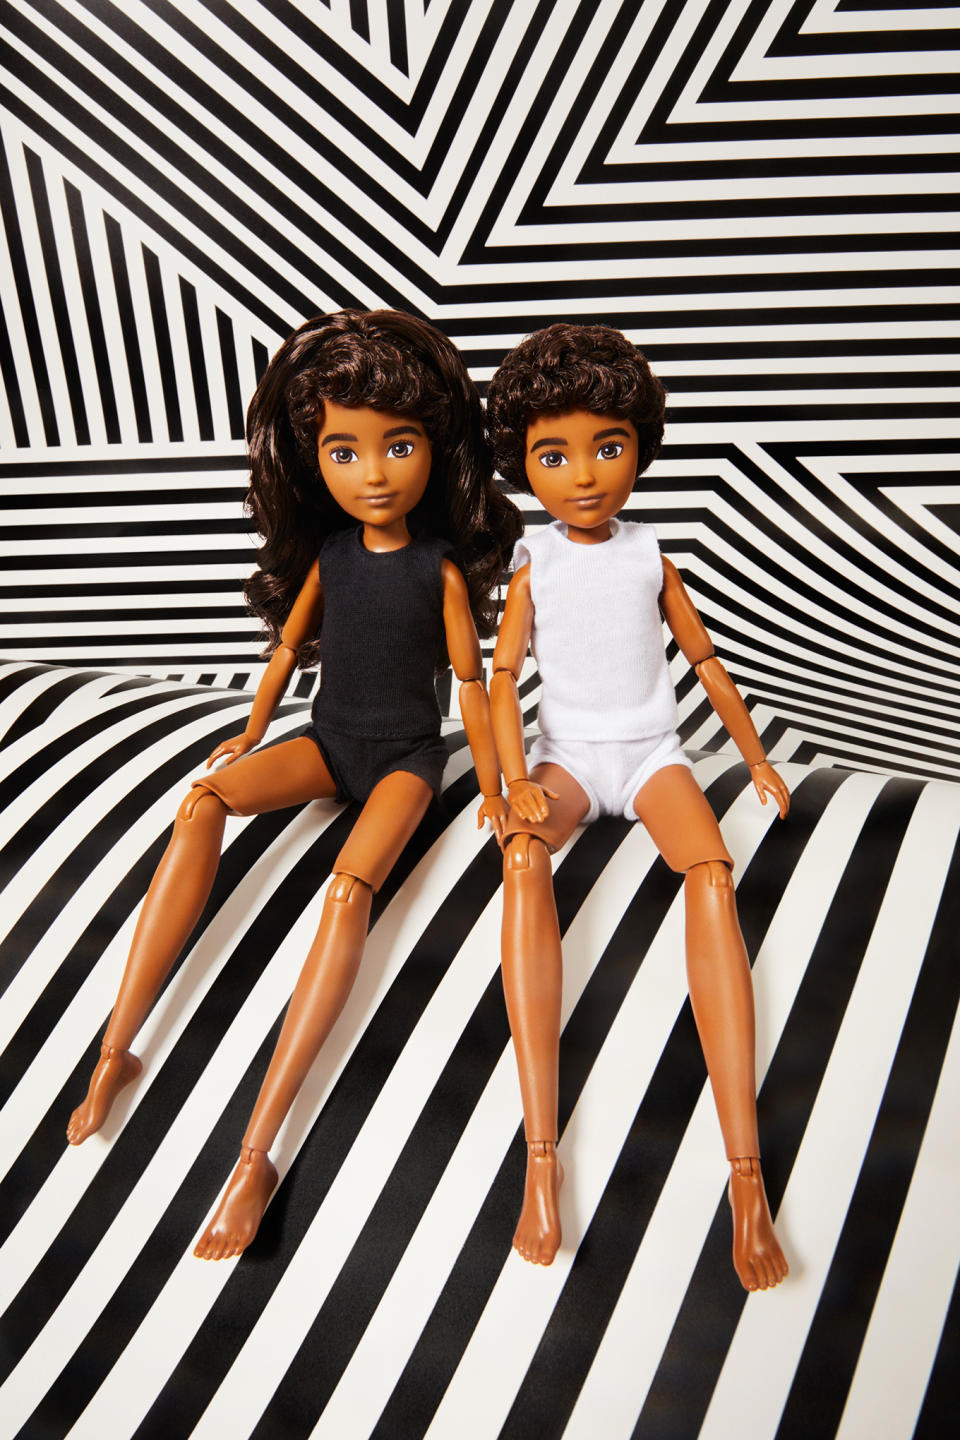 Mattel, which calls this the world’s first gender-neutral doll, is hoping its launch redefines who gets to play with a toy traditionally deemed taboo for half the world’s kids. | Photograph by JUCO for TIME